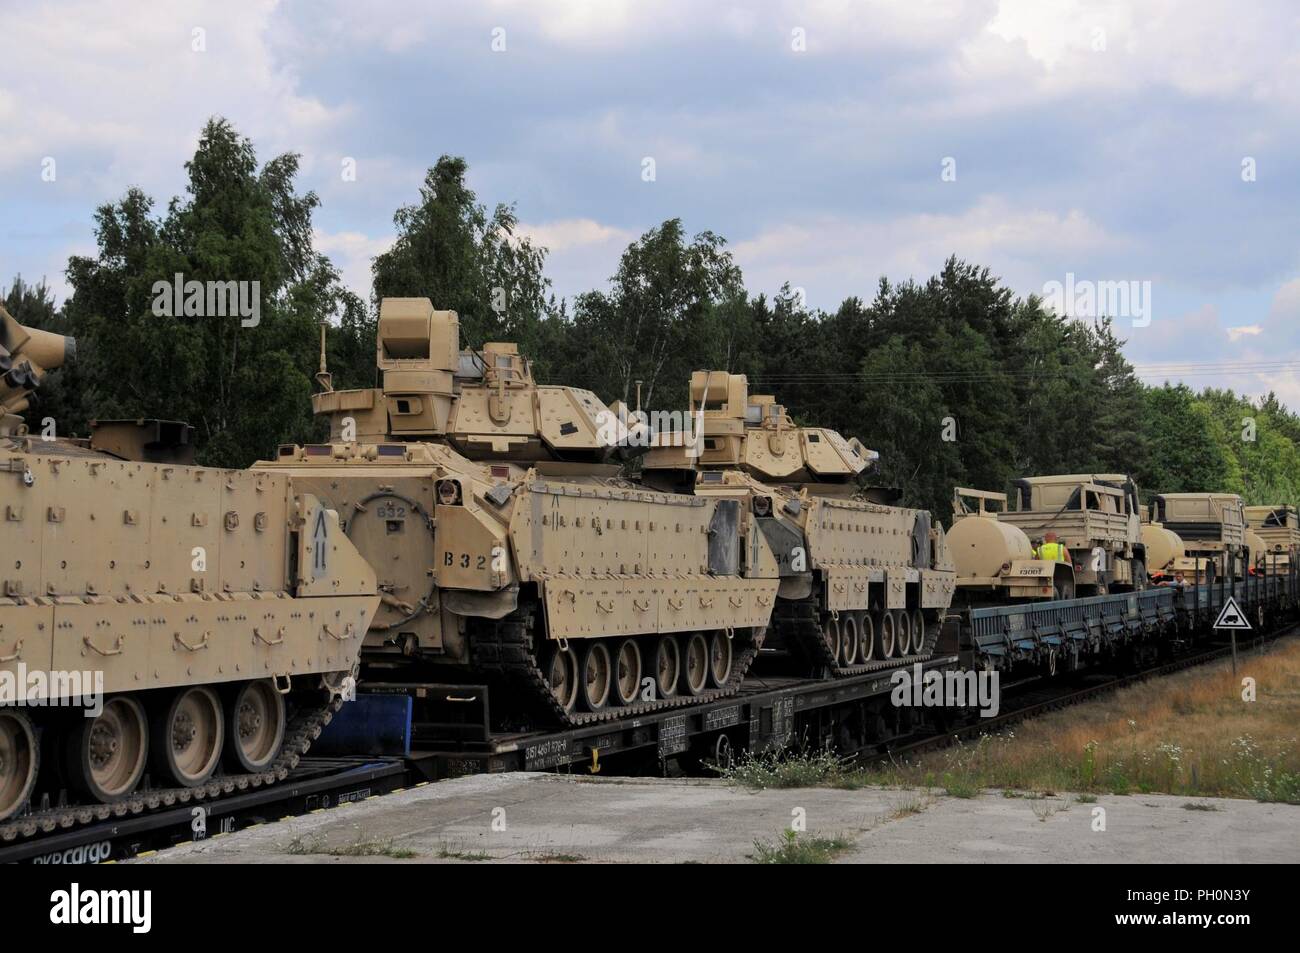 U.S. Soldiers from the 2nd Battalion, 5th Cavalry Regiment, 1st Armored Brigade Combat Team, 1st Cavalry Division, rail load their vehicles and equipment during Atlantic Resolve at Zagan, Poland, June 18, 2018. Atlantic Resolve is a demonstration of continued U.S. commitment to collective security through a series of actions designed to reassure NATO allies and partners of America's dedication to enduring peace and stability in the region. Stock Photo